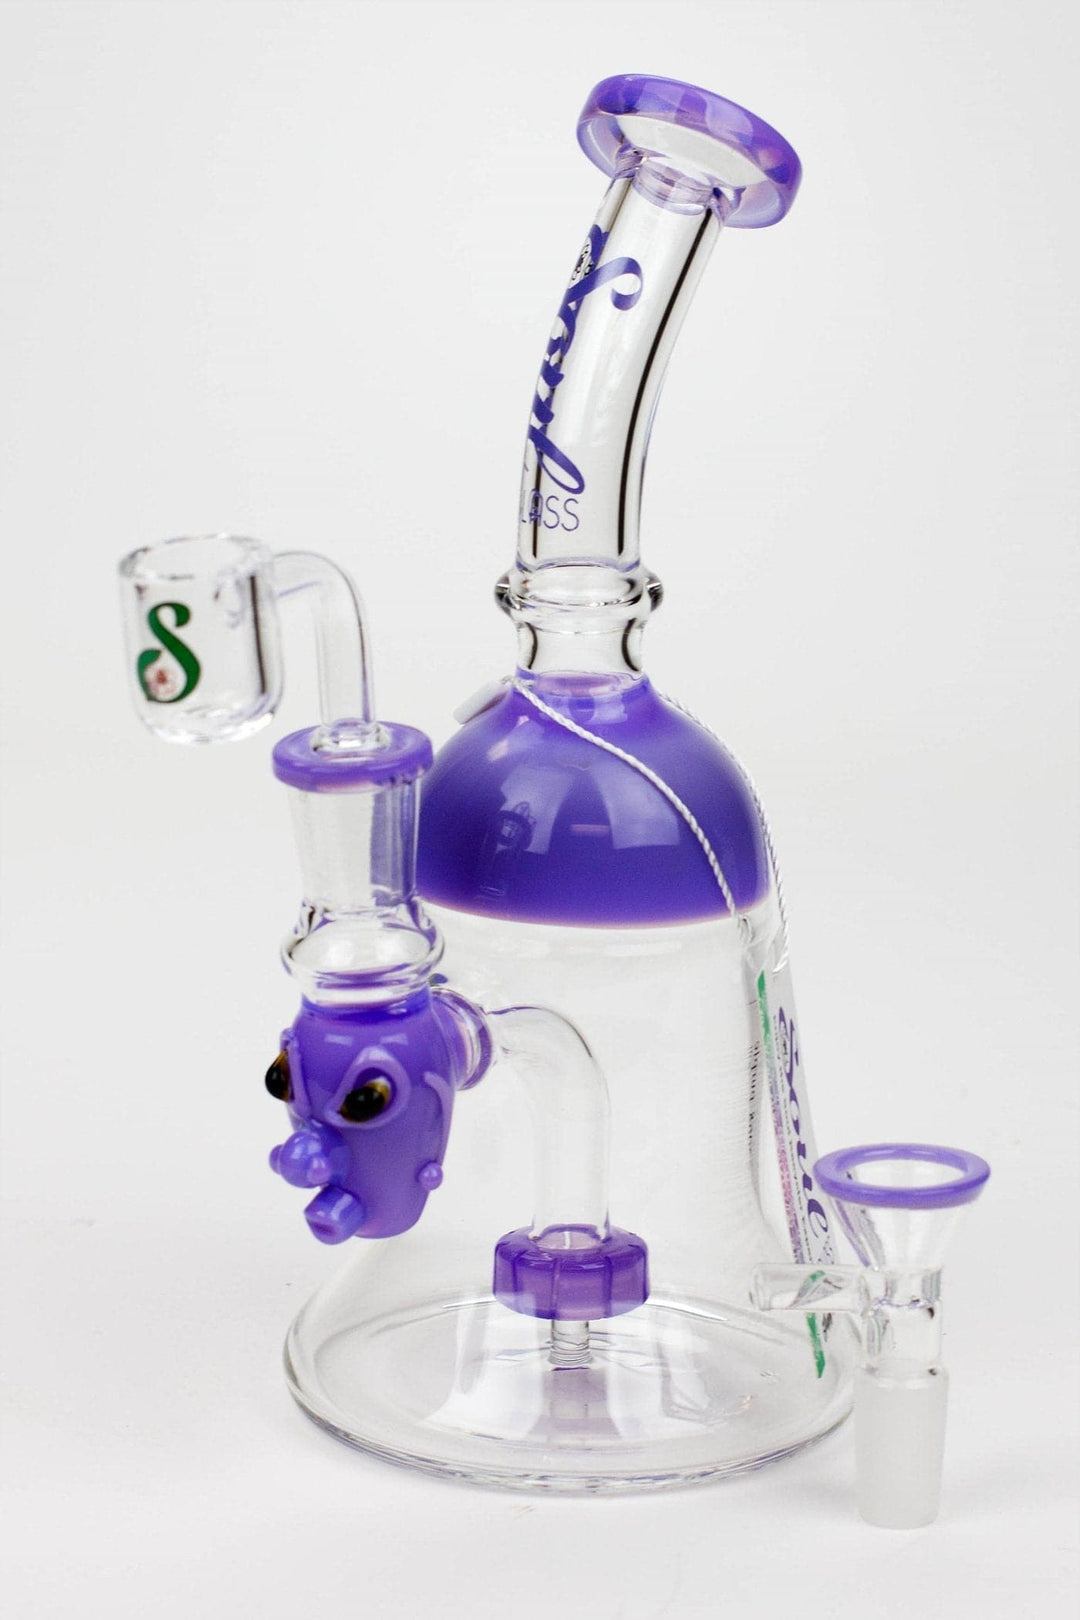 Soul glass 2-in-1 show head diffuser water pipes_8